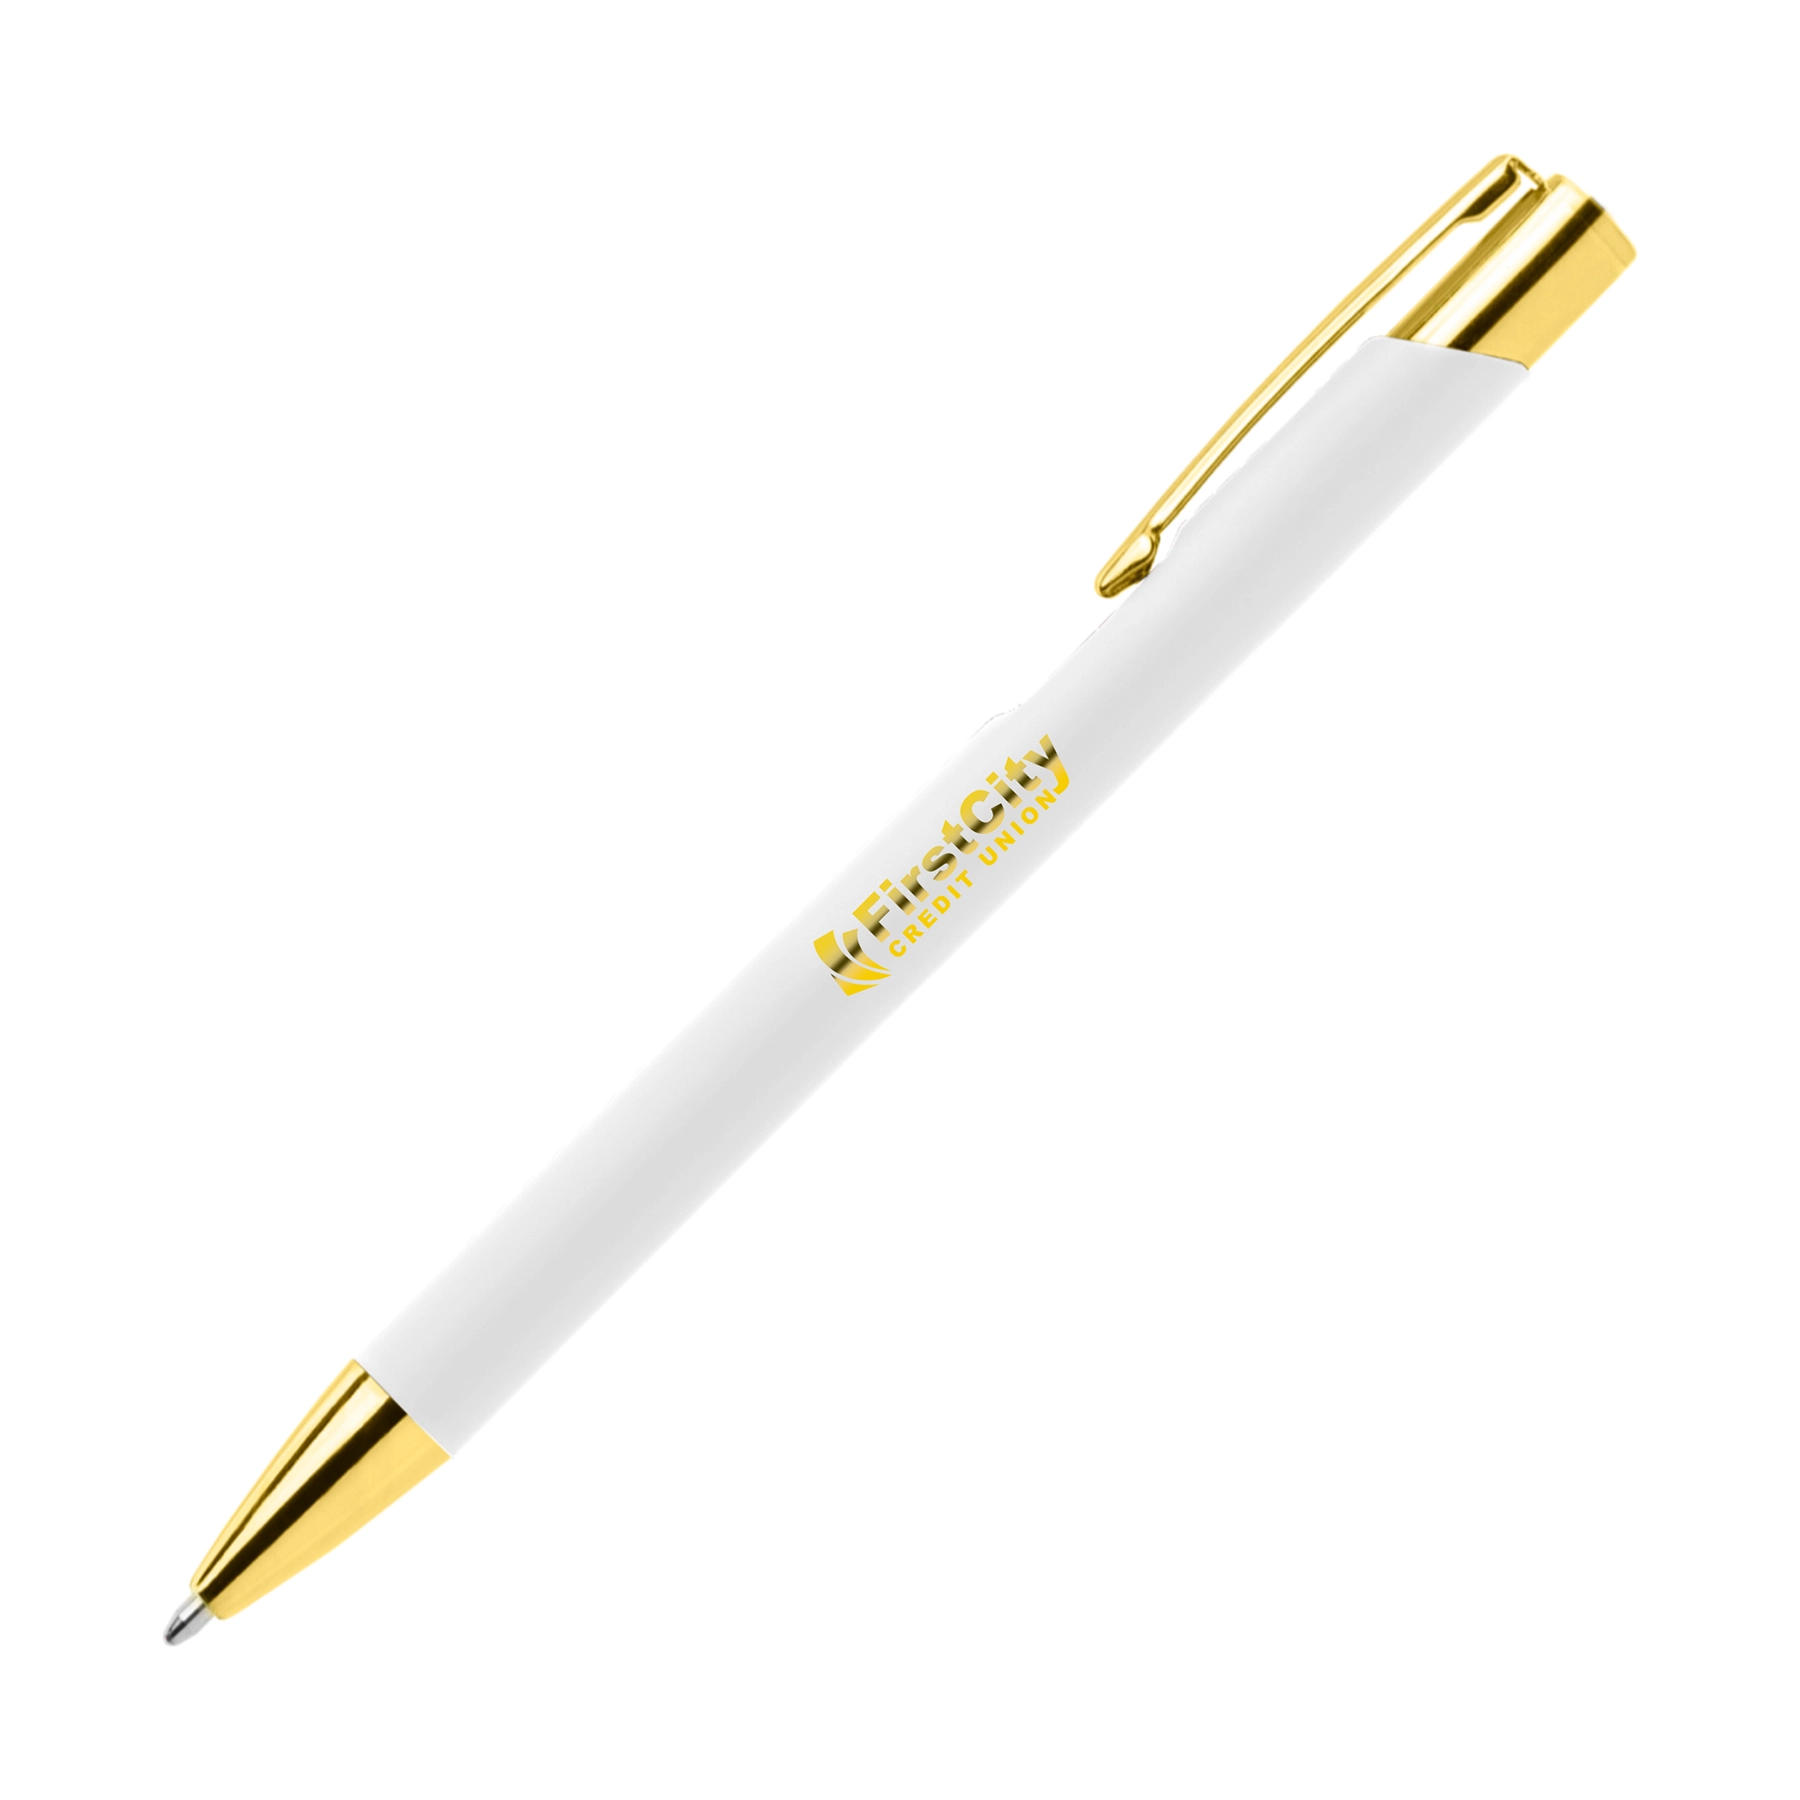 https://pennepersonalizzate.org/wp-content/uploads/2019/11/PP-mmq-white_incisione-laser-oro.webp